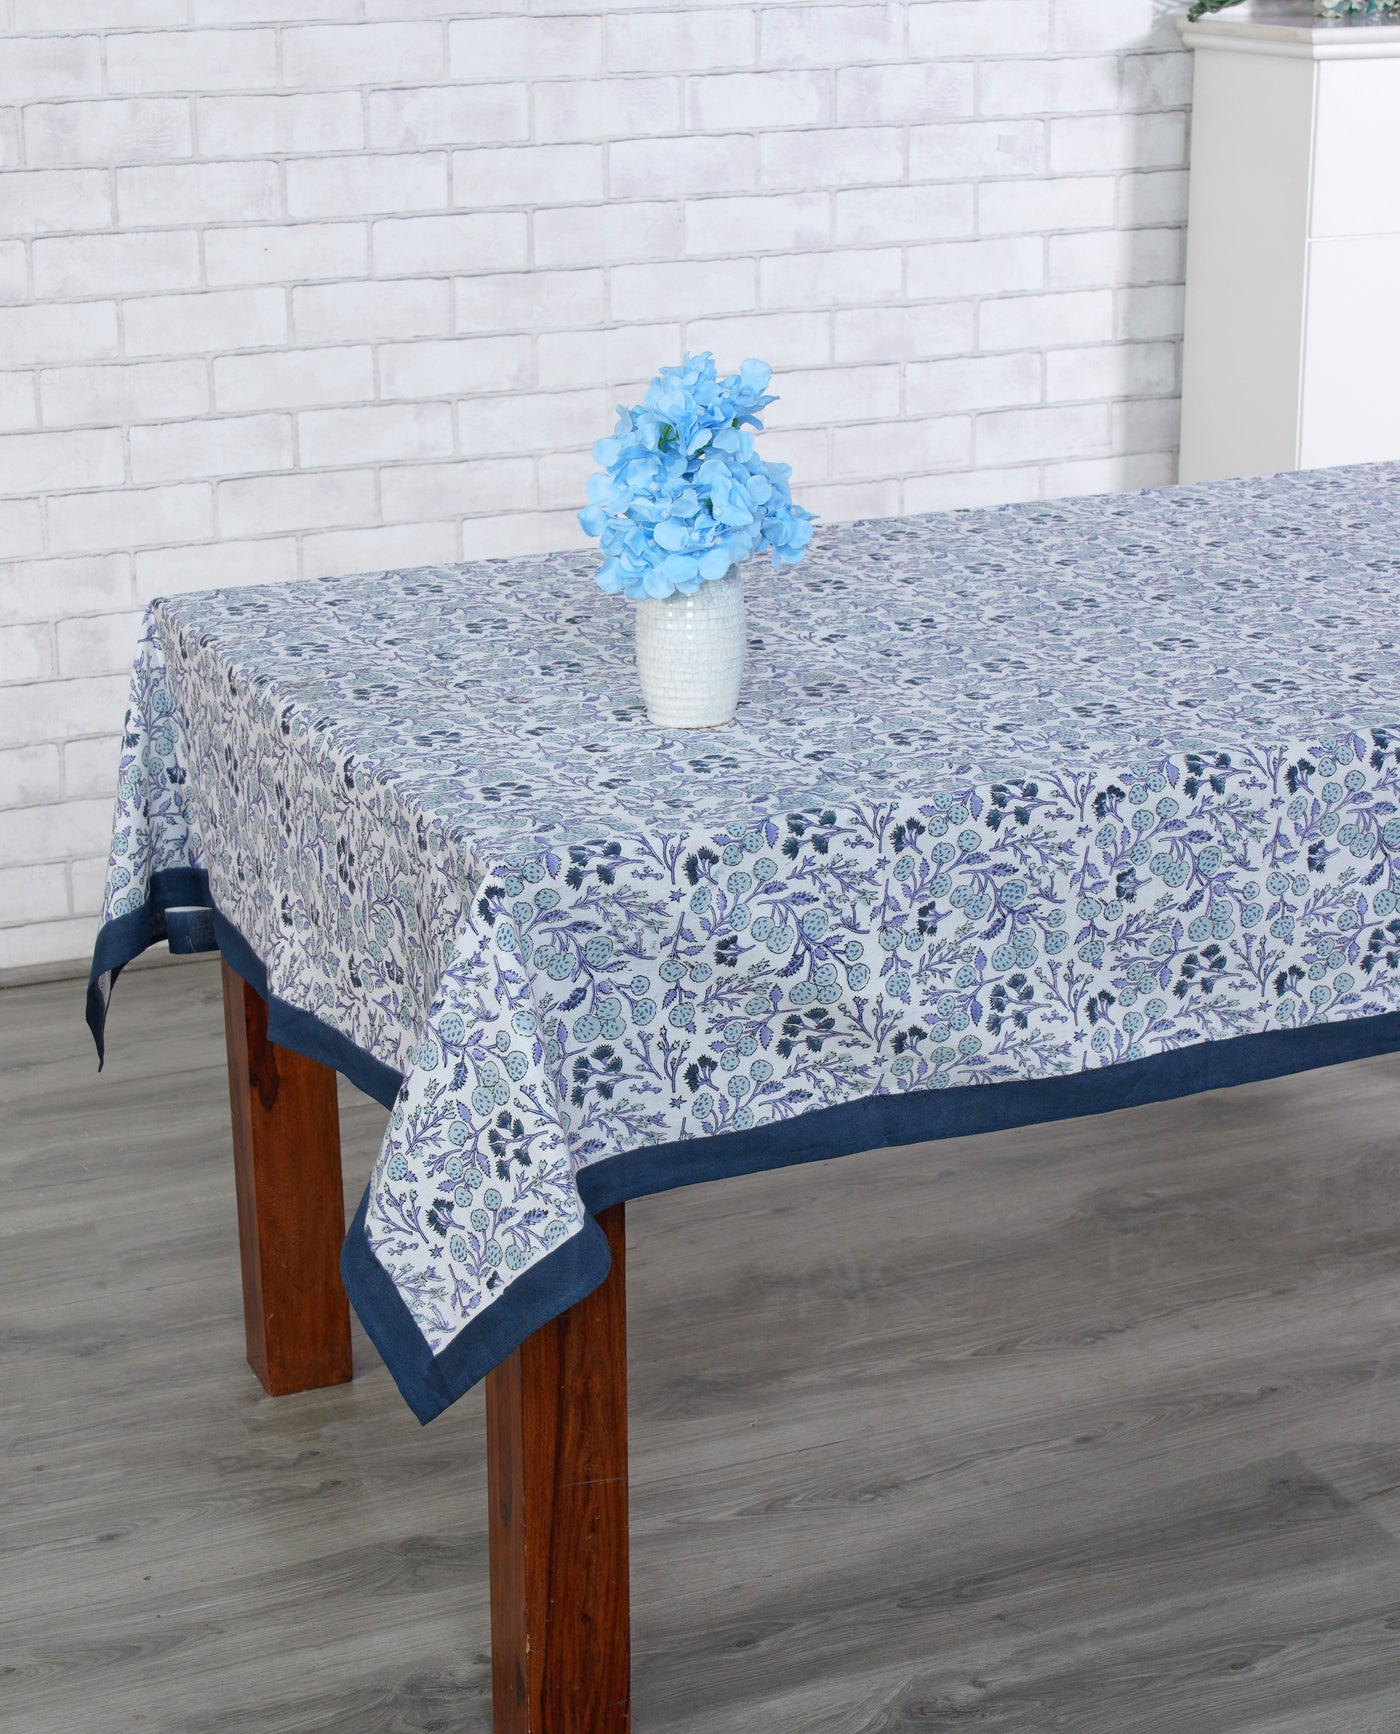 Fabricrush Denim and Baby Blue Indian Handicraft Block Printing 100% Pure Cotton Border Design Tablecloth And  Table Cover